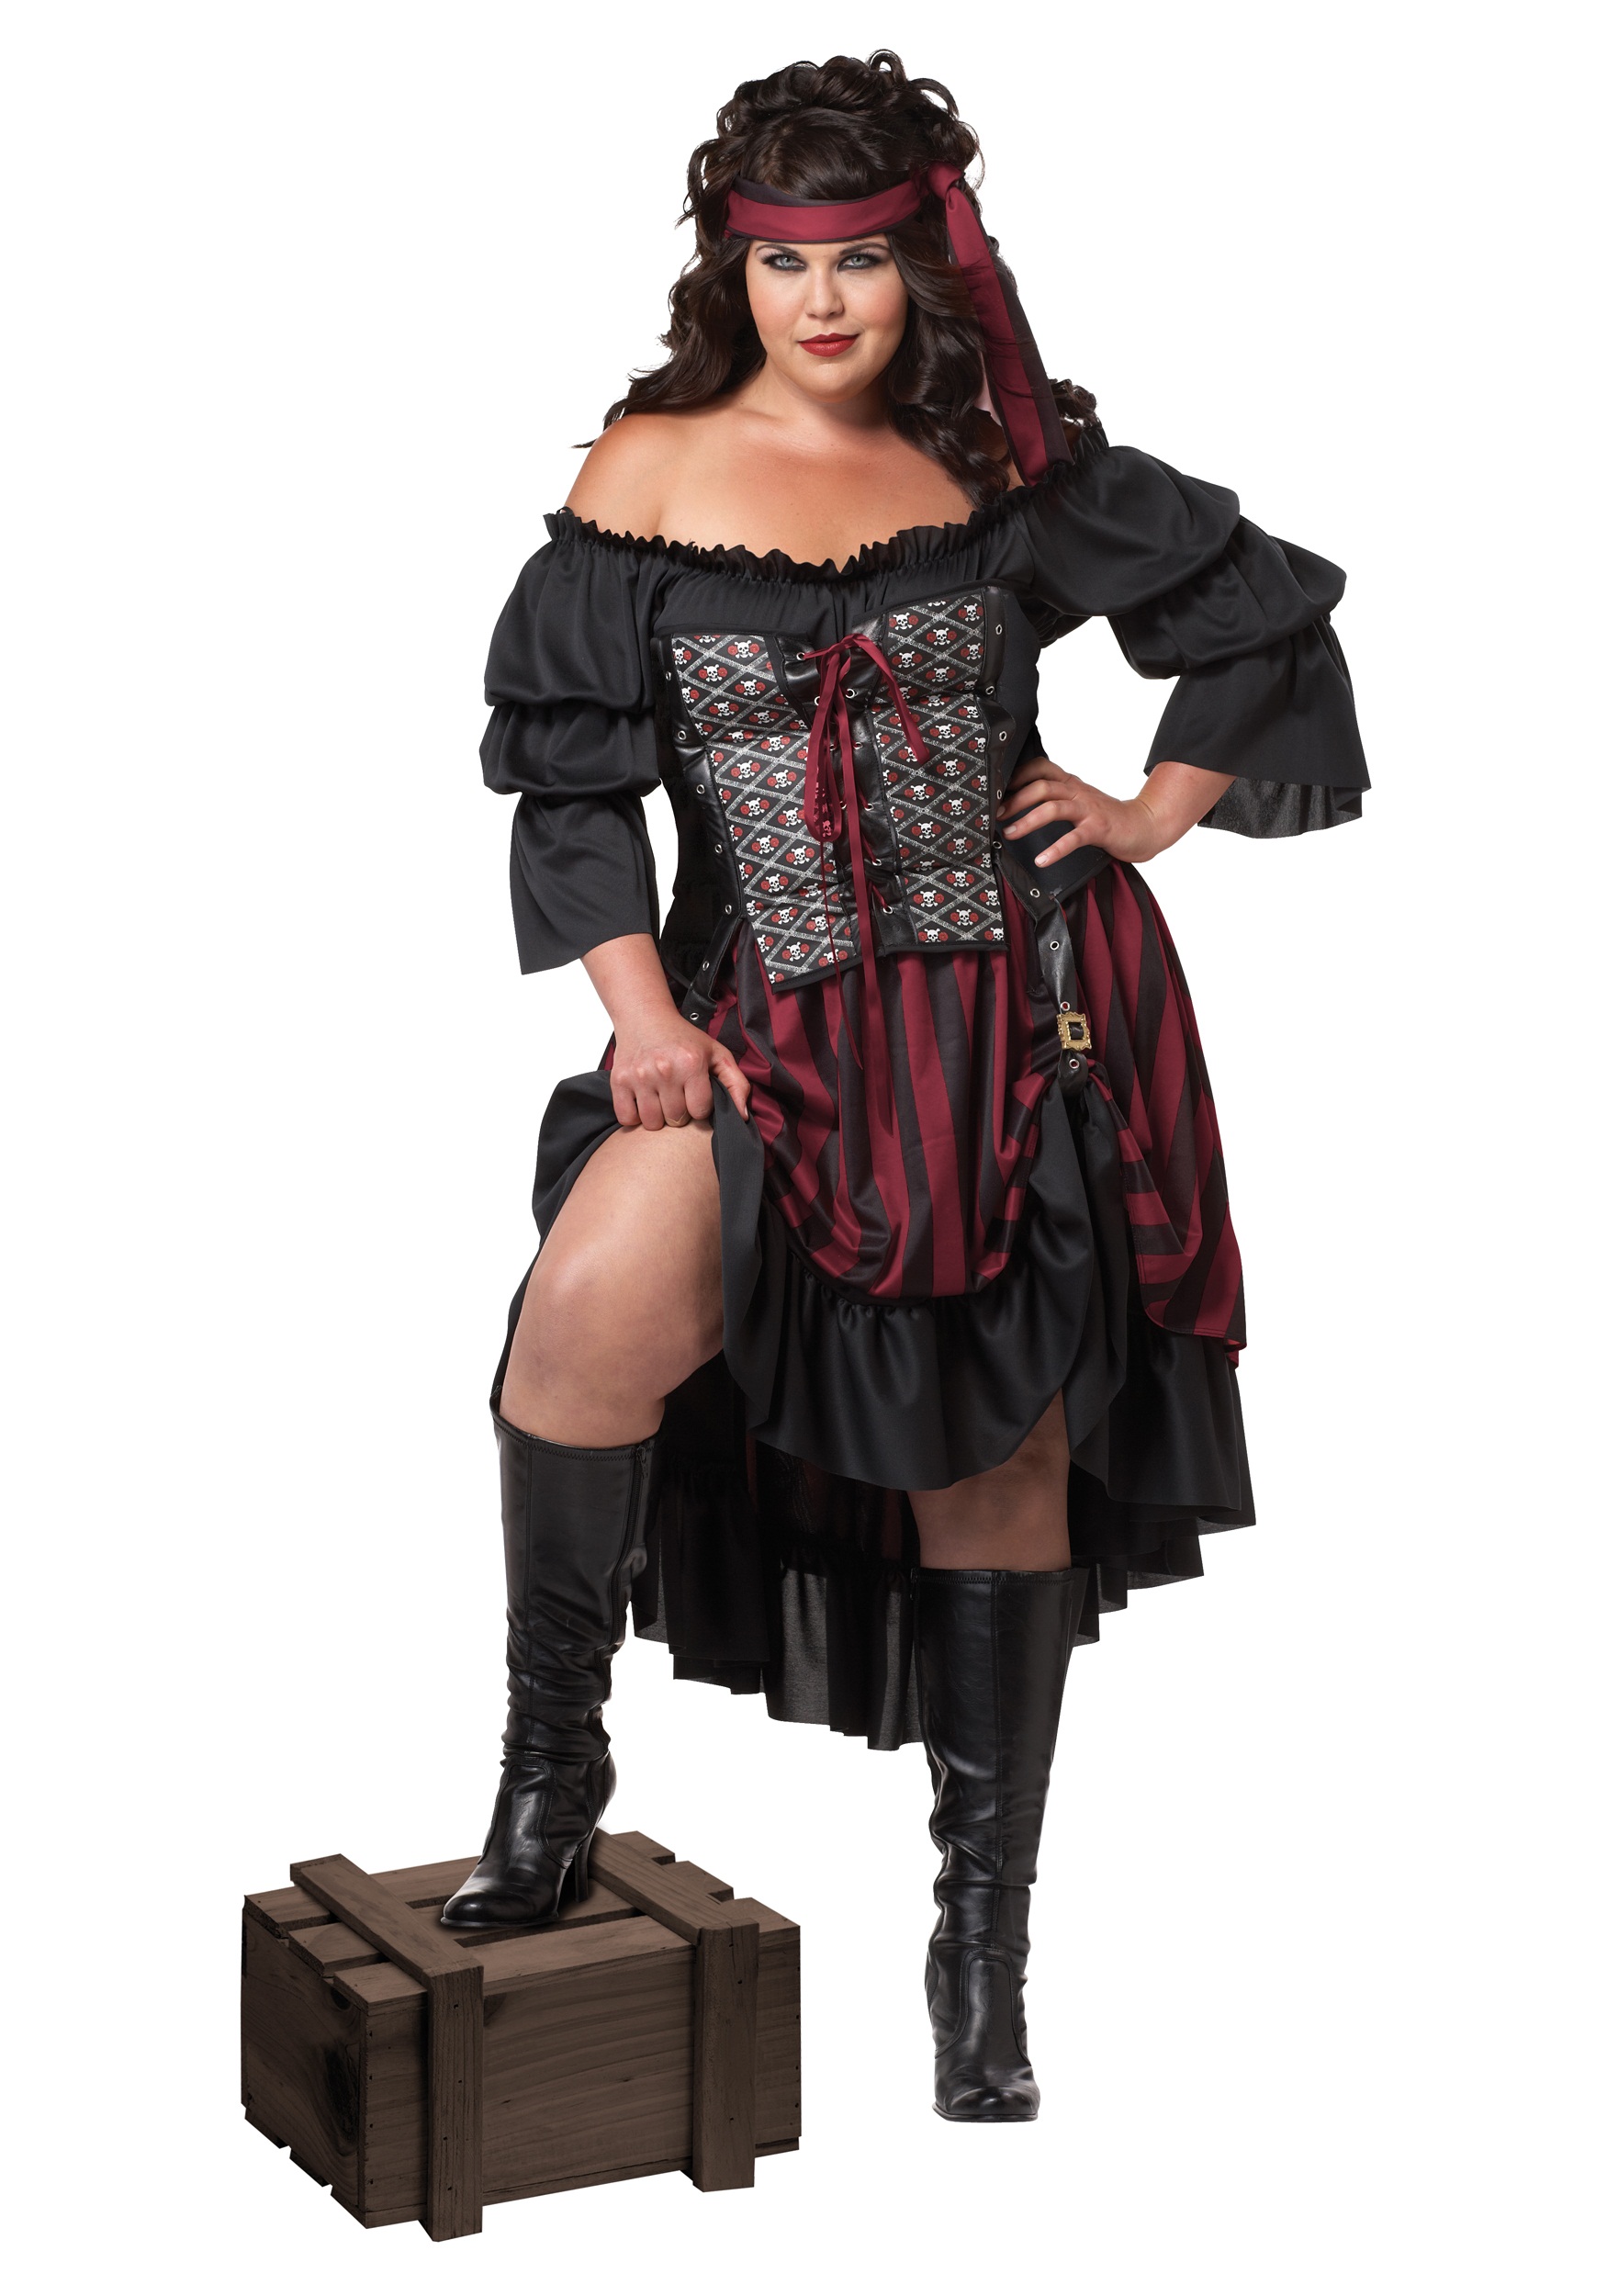 Plus Size Pirate Wench Costume Womens Pirate Halloween Costume 3888